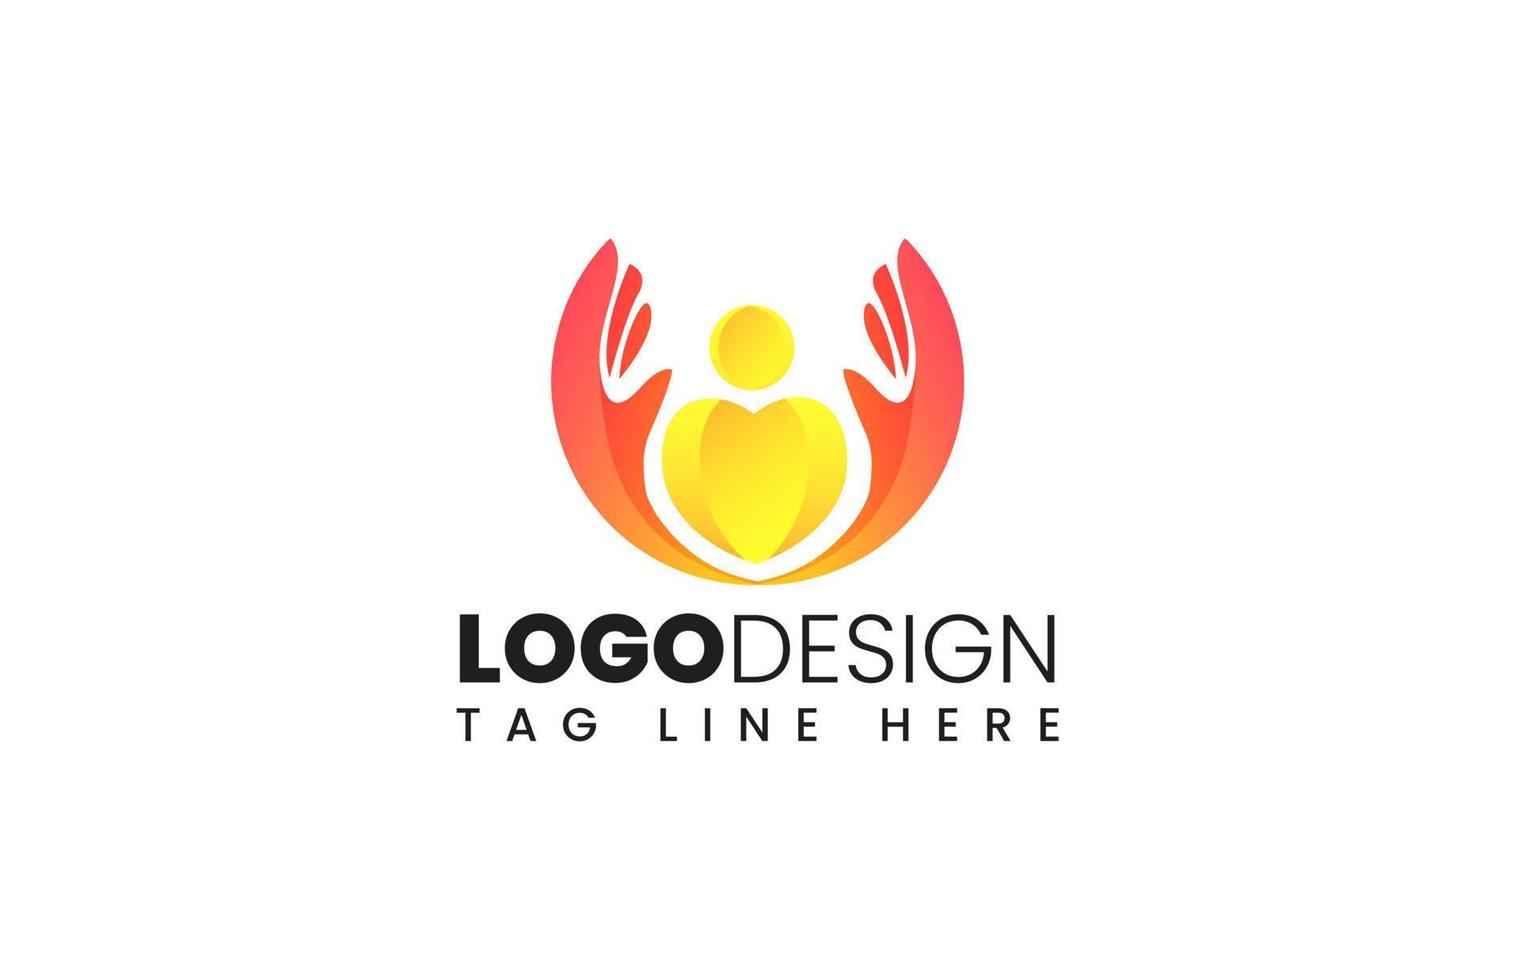 Nonprofit - NGO, Charity or Fundraising logo design template vector